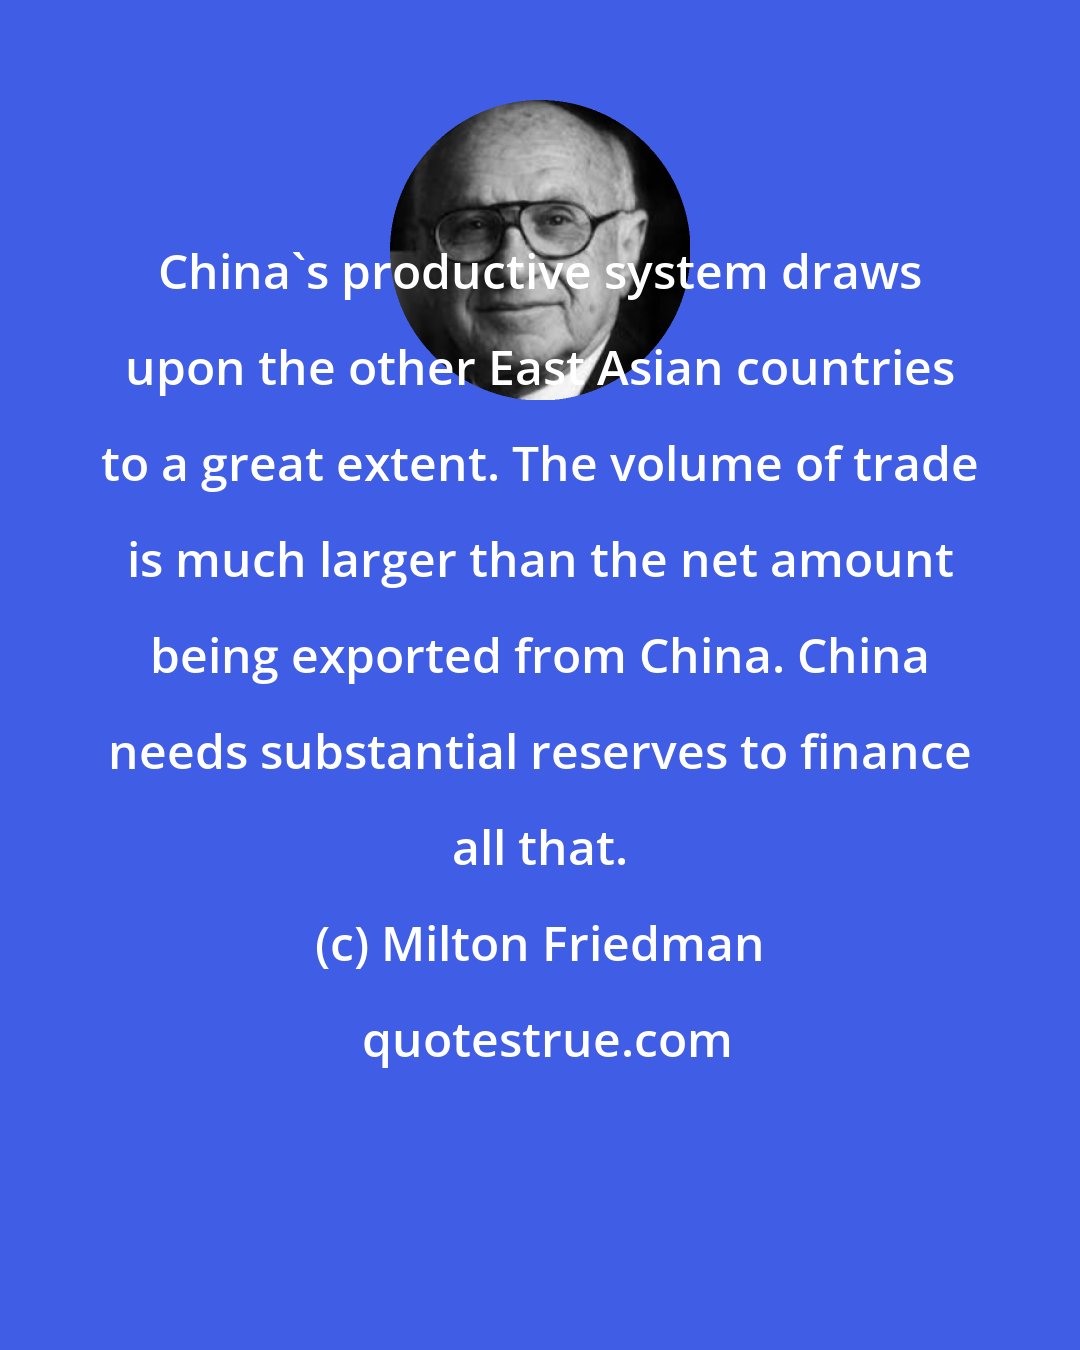 Milton Friedman: China's productive system draws upon the other East Asian countries to a great extent. The volume of trade is much larger than the net amount being exported from China. China needs substantial reserves to finance all that.